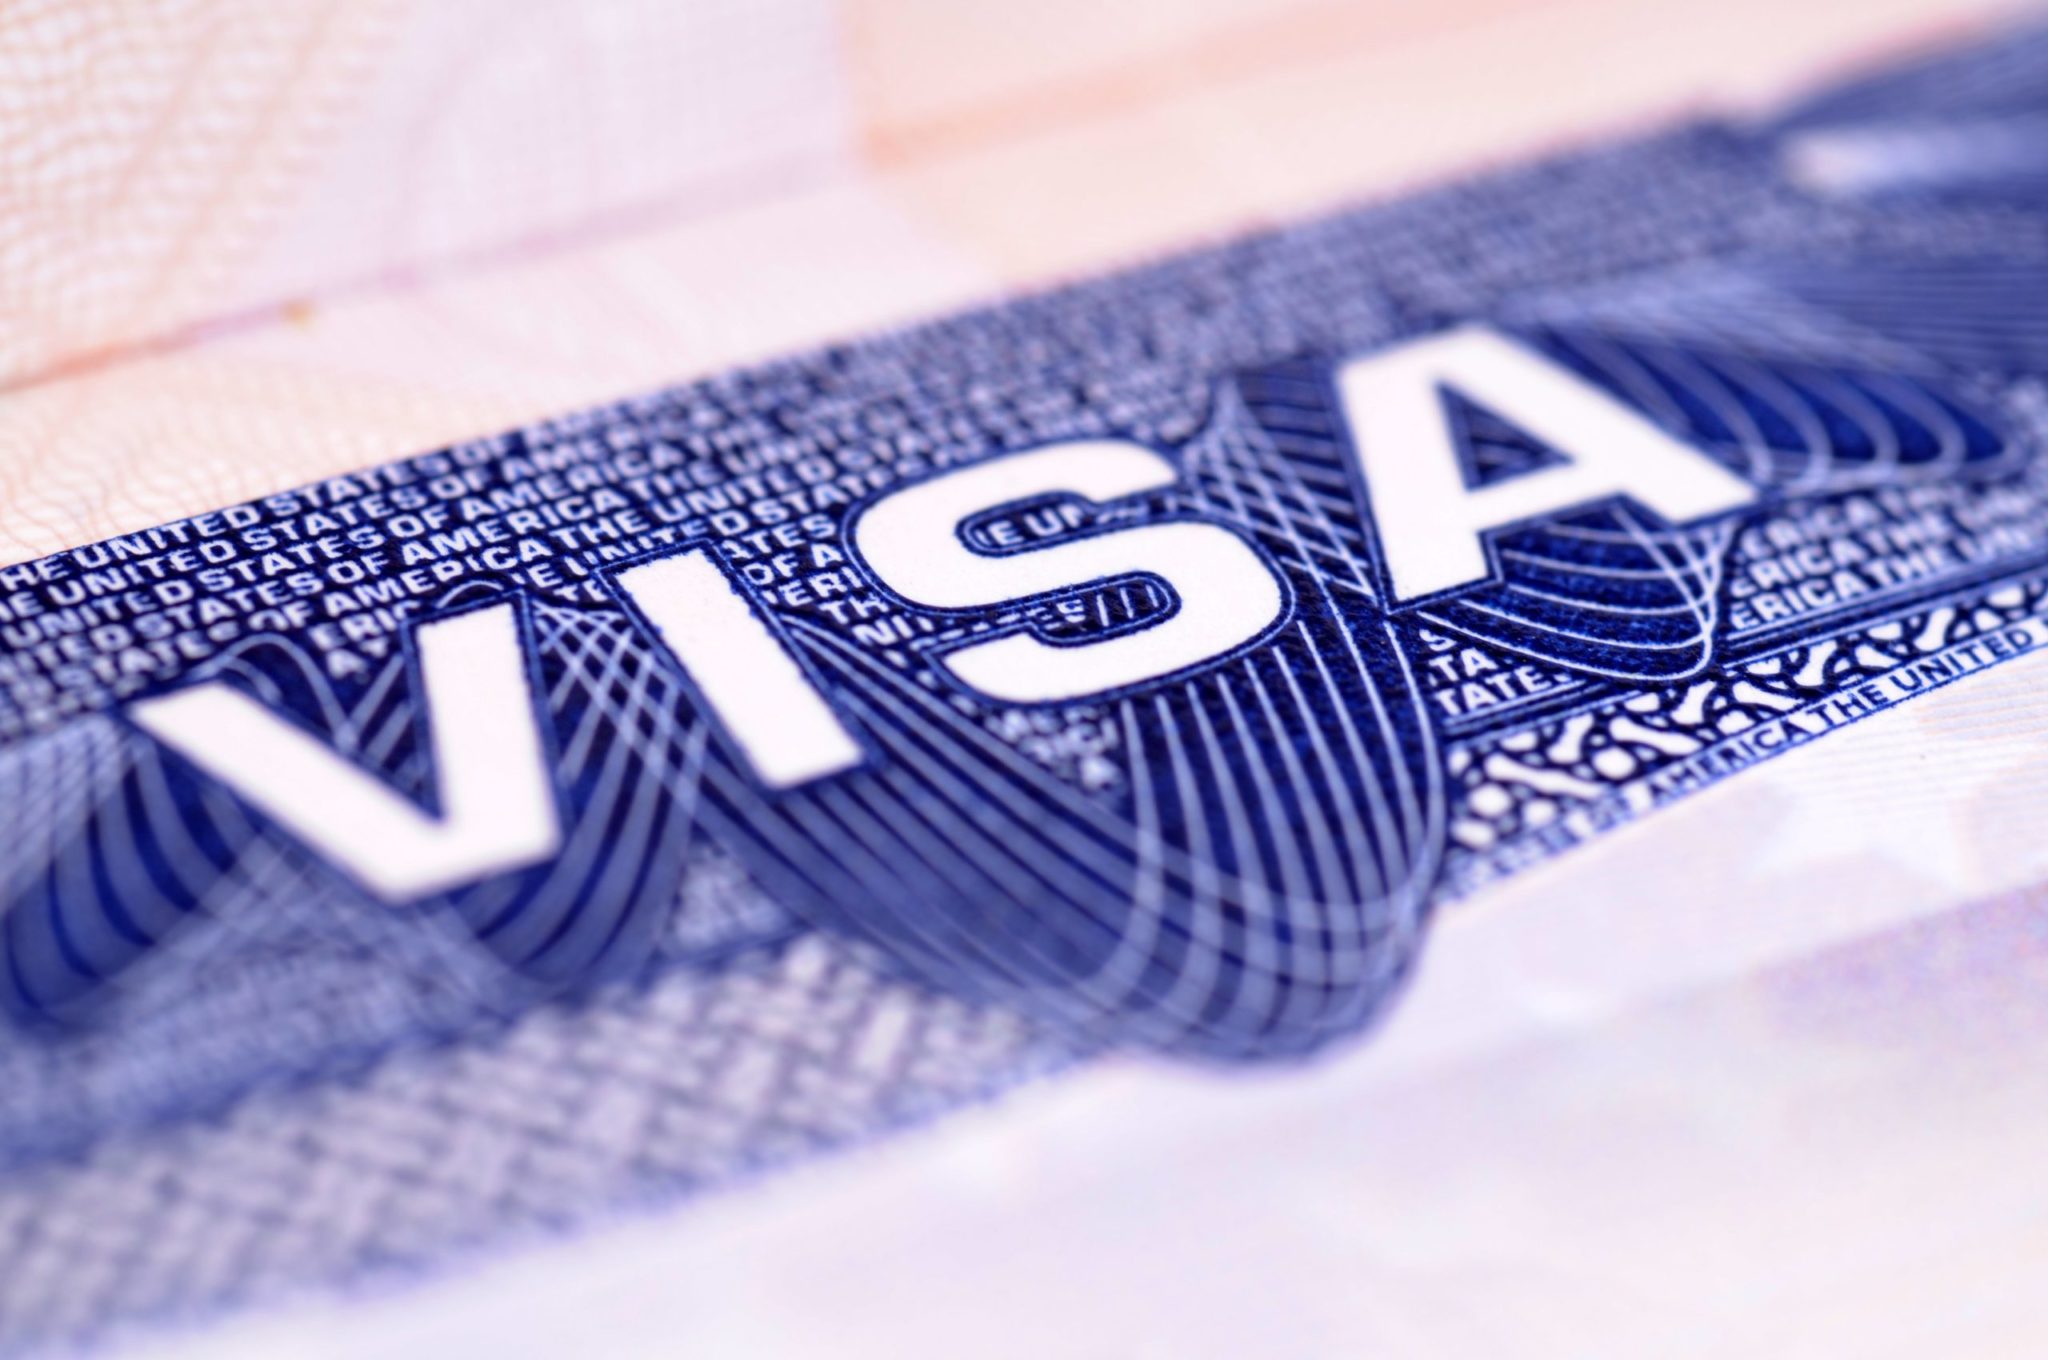 Golden Visa is a term used for all residence by investment programs where someone makes an investment in the country and then receives special treatment in the immigration process